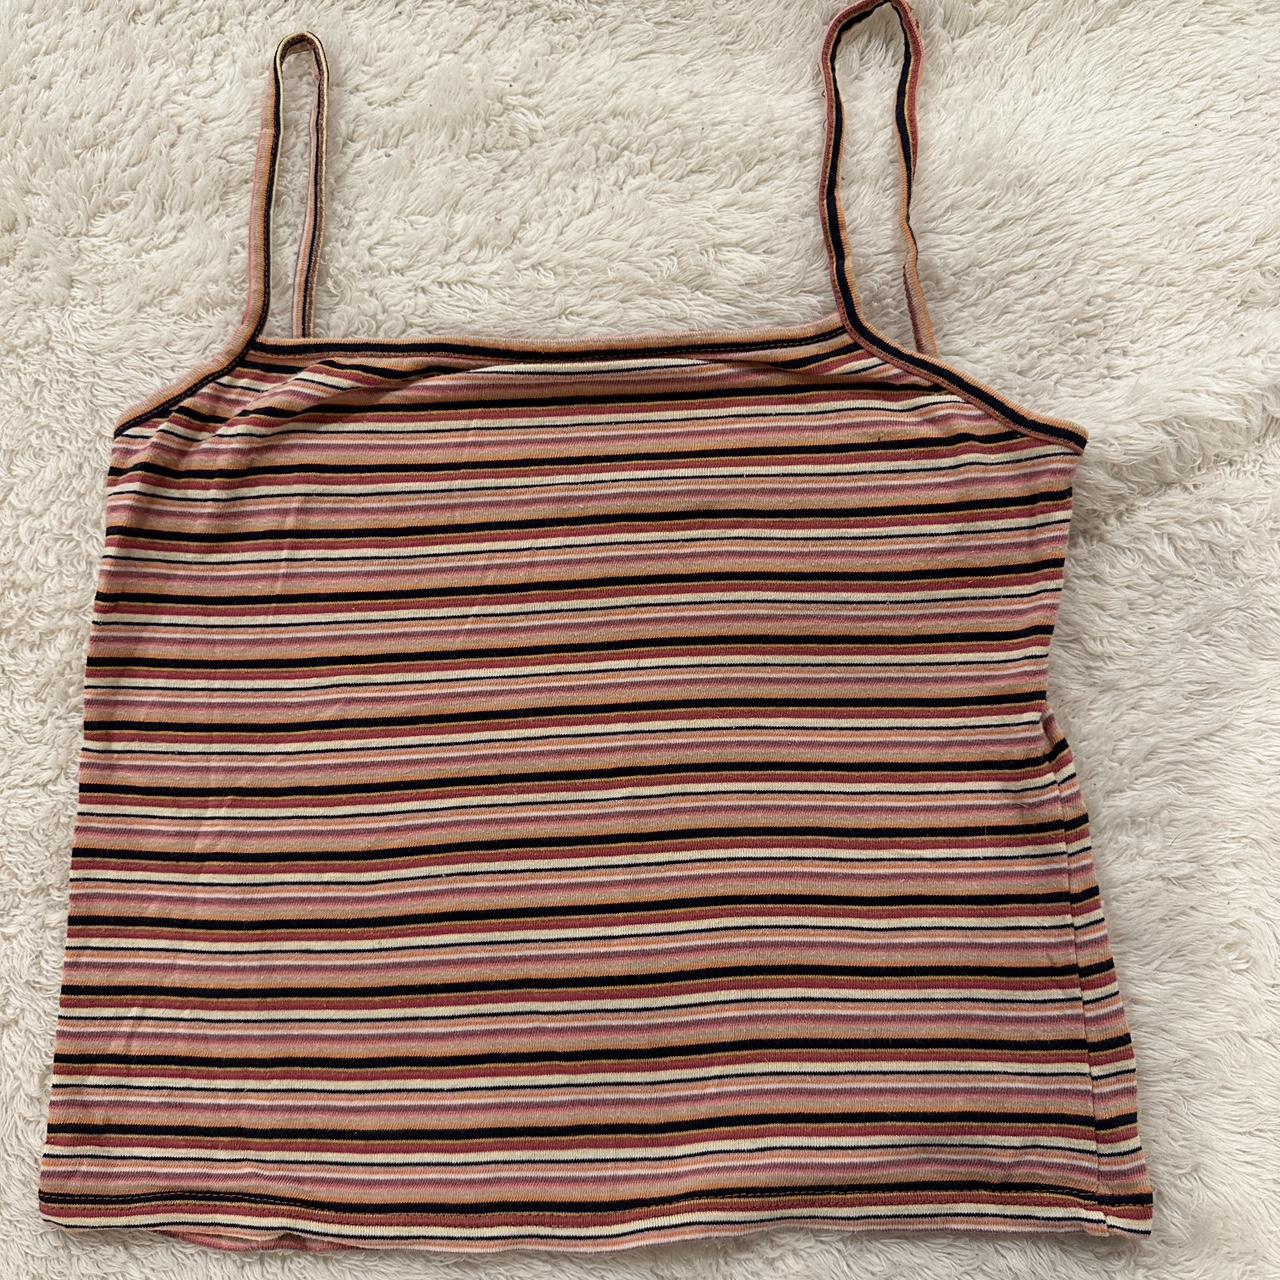 Brandy Melville Tank Top Worn only a couple of - Depop